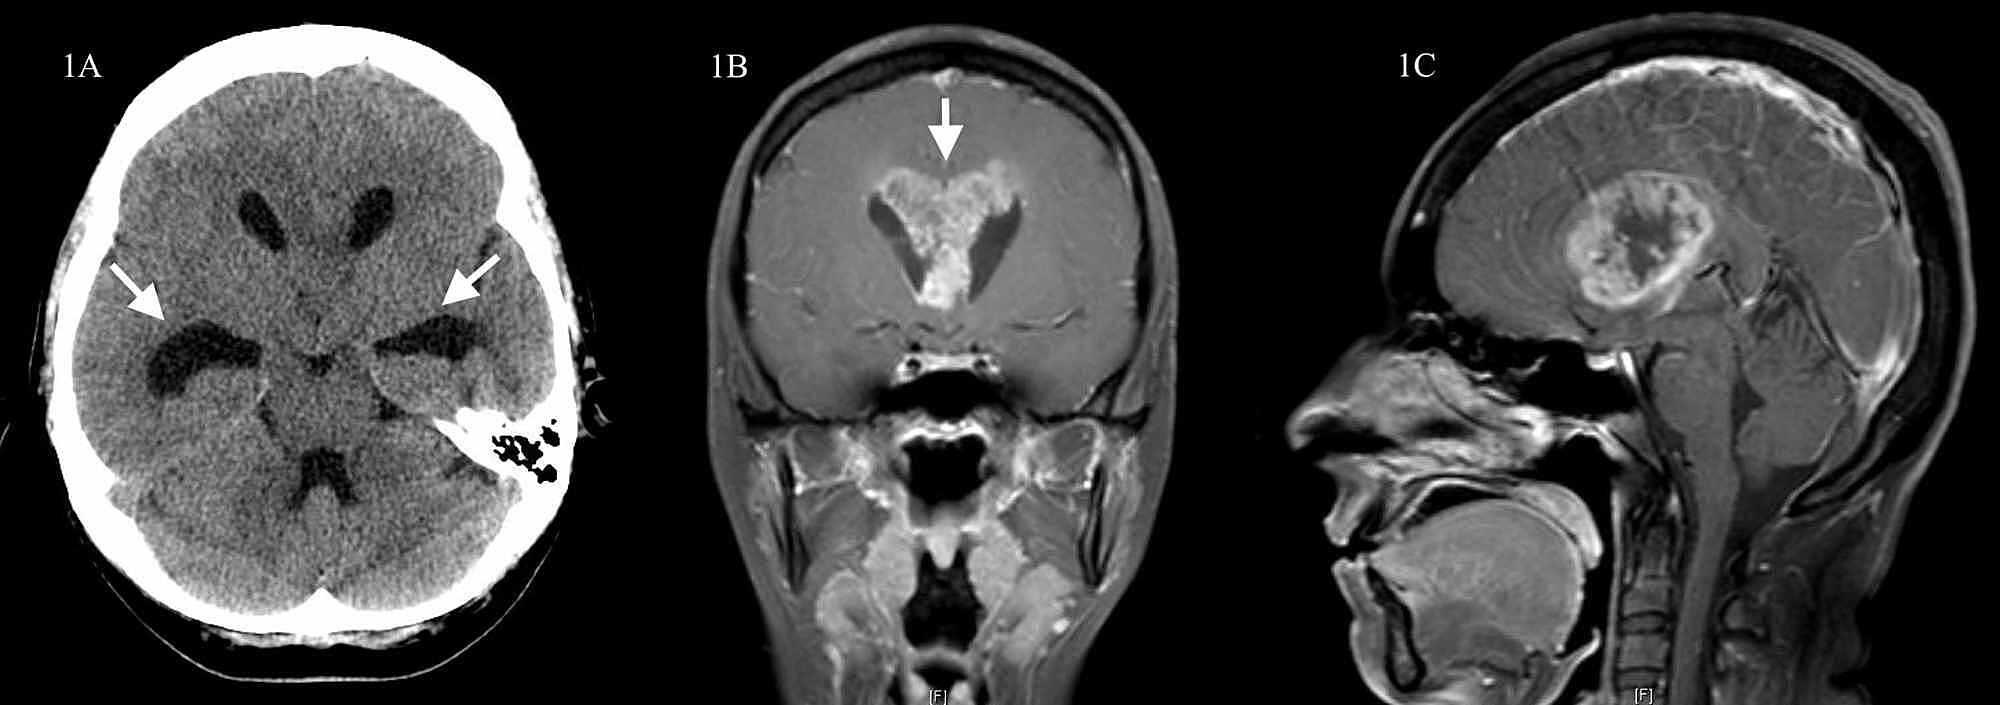 brain tumor mri without contrast